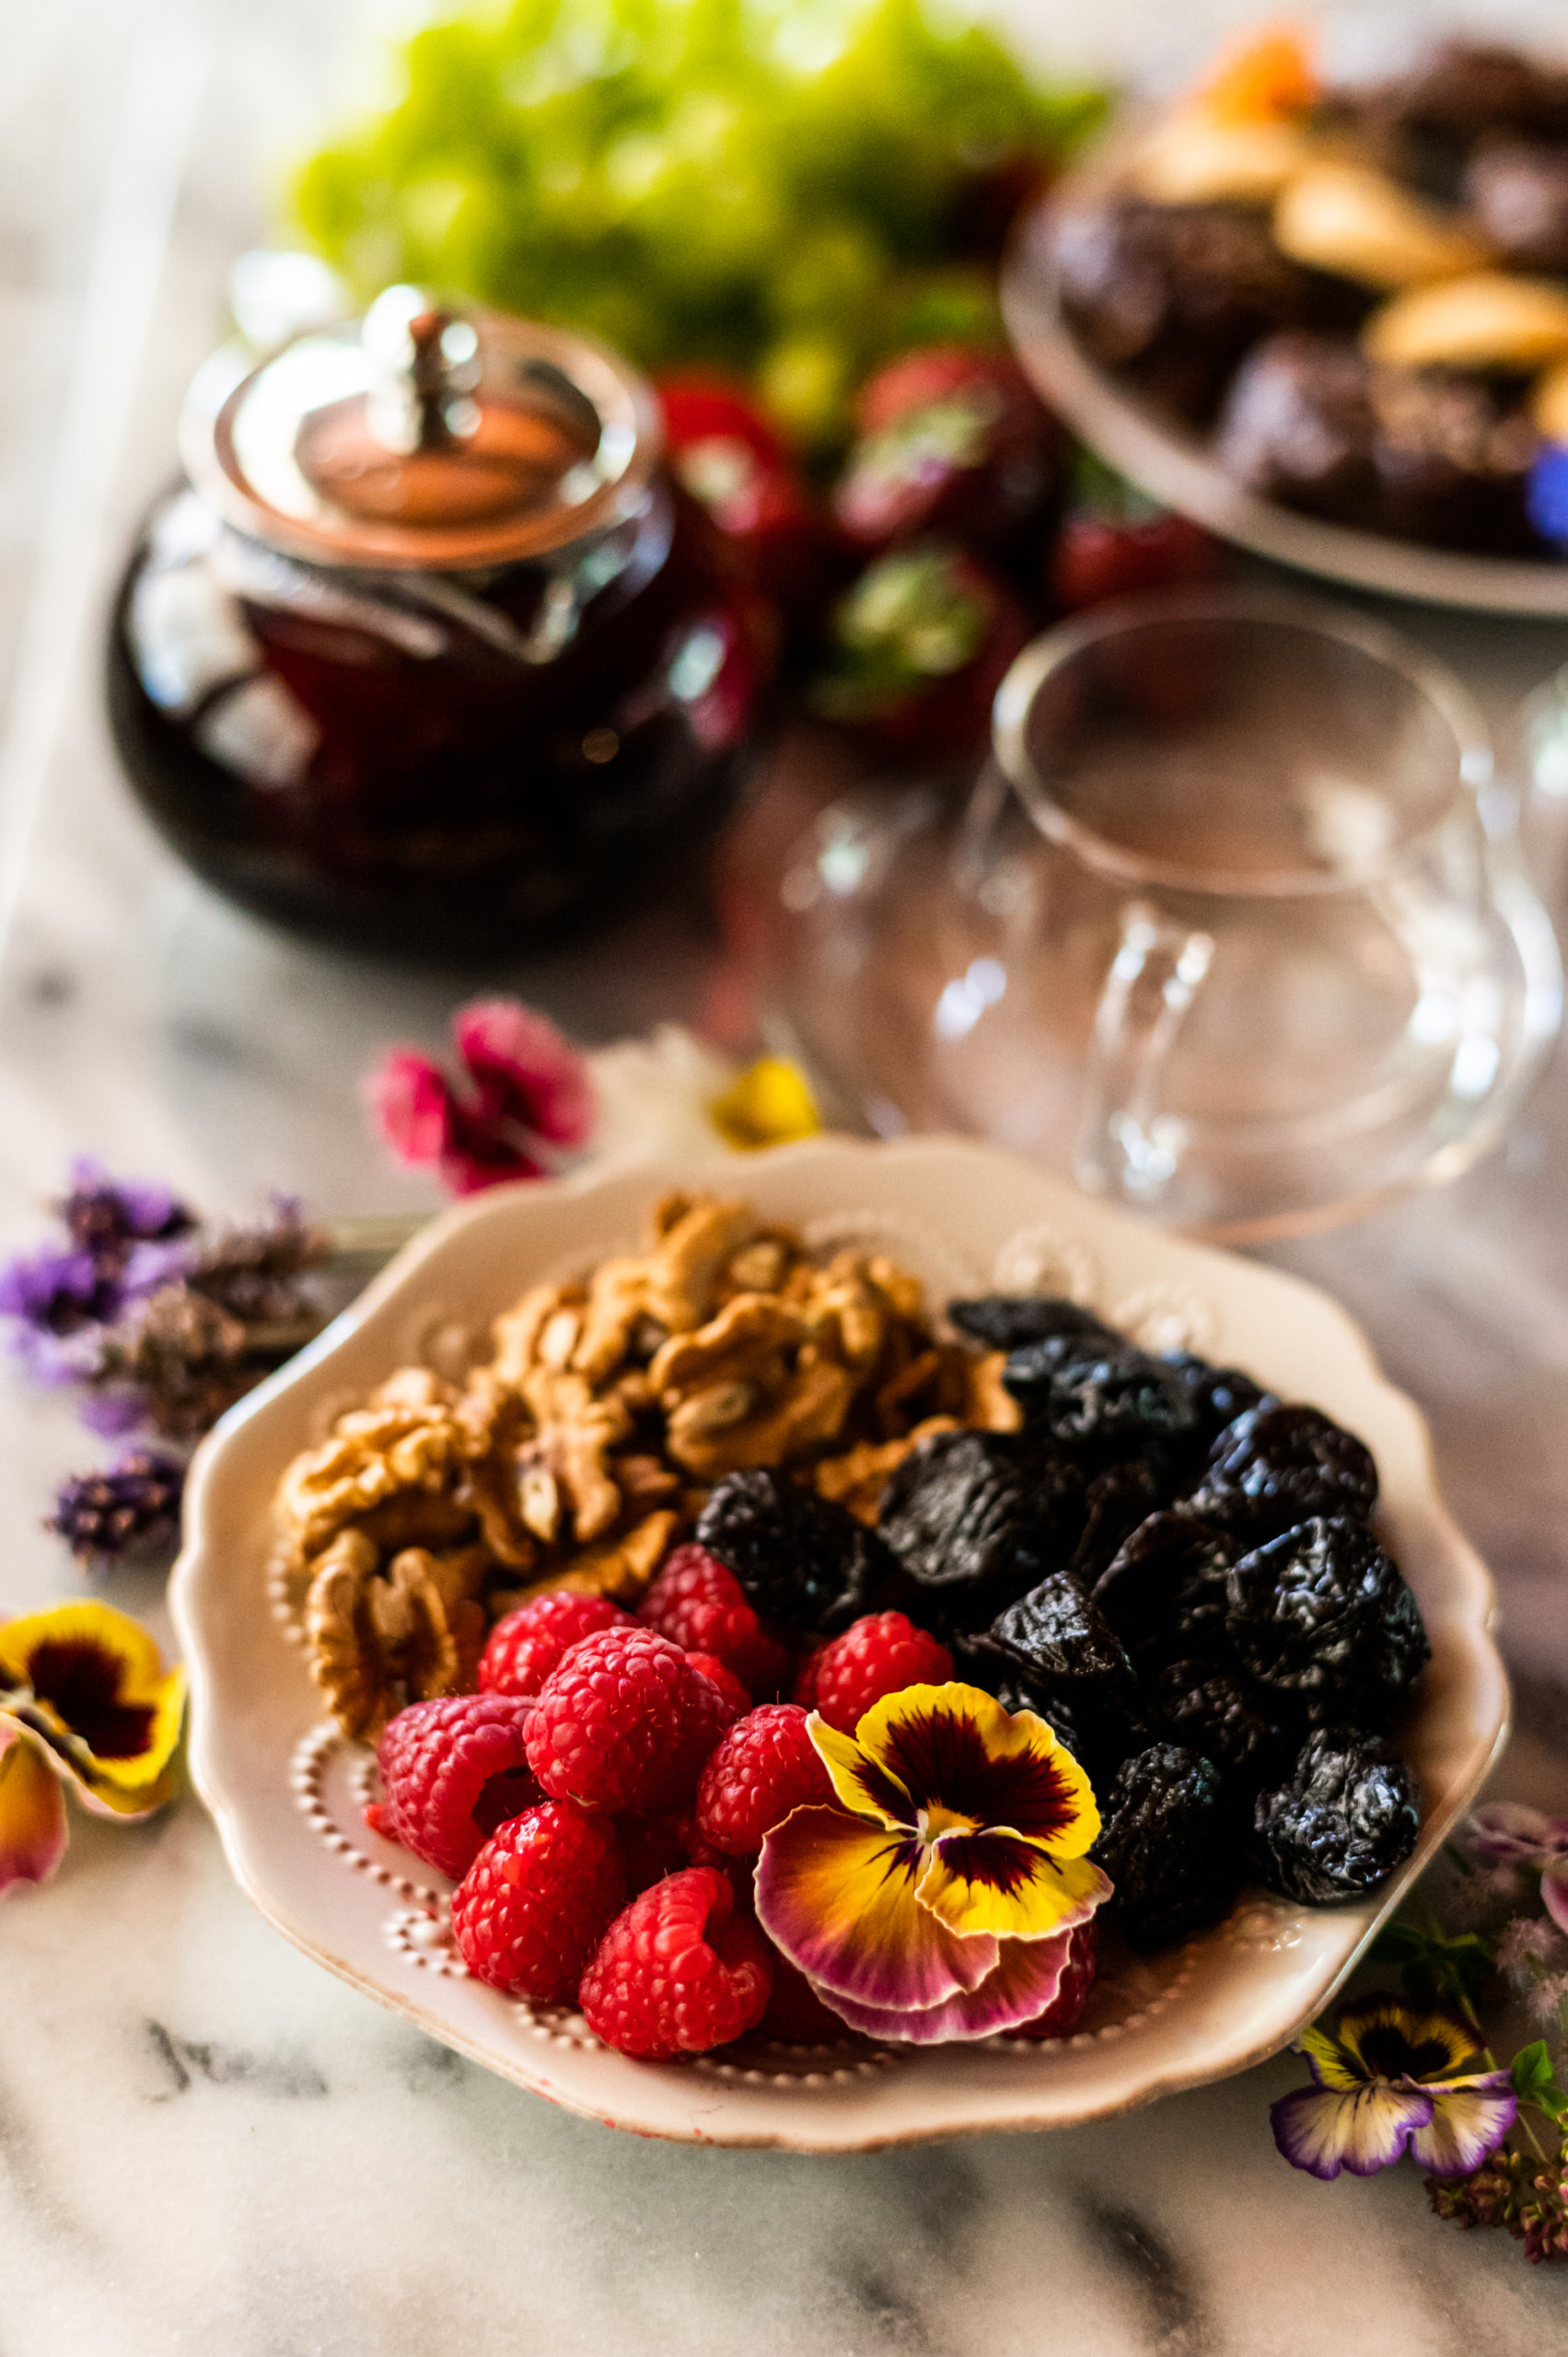 A party spread with tea, featuring California prunes